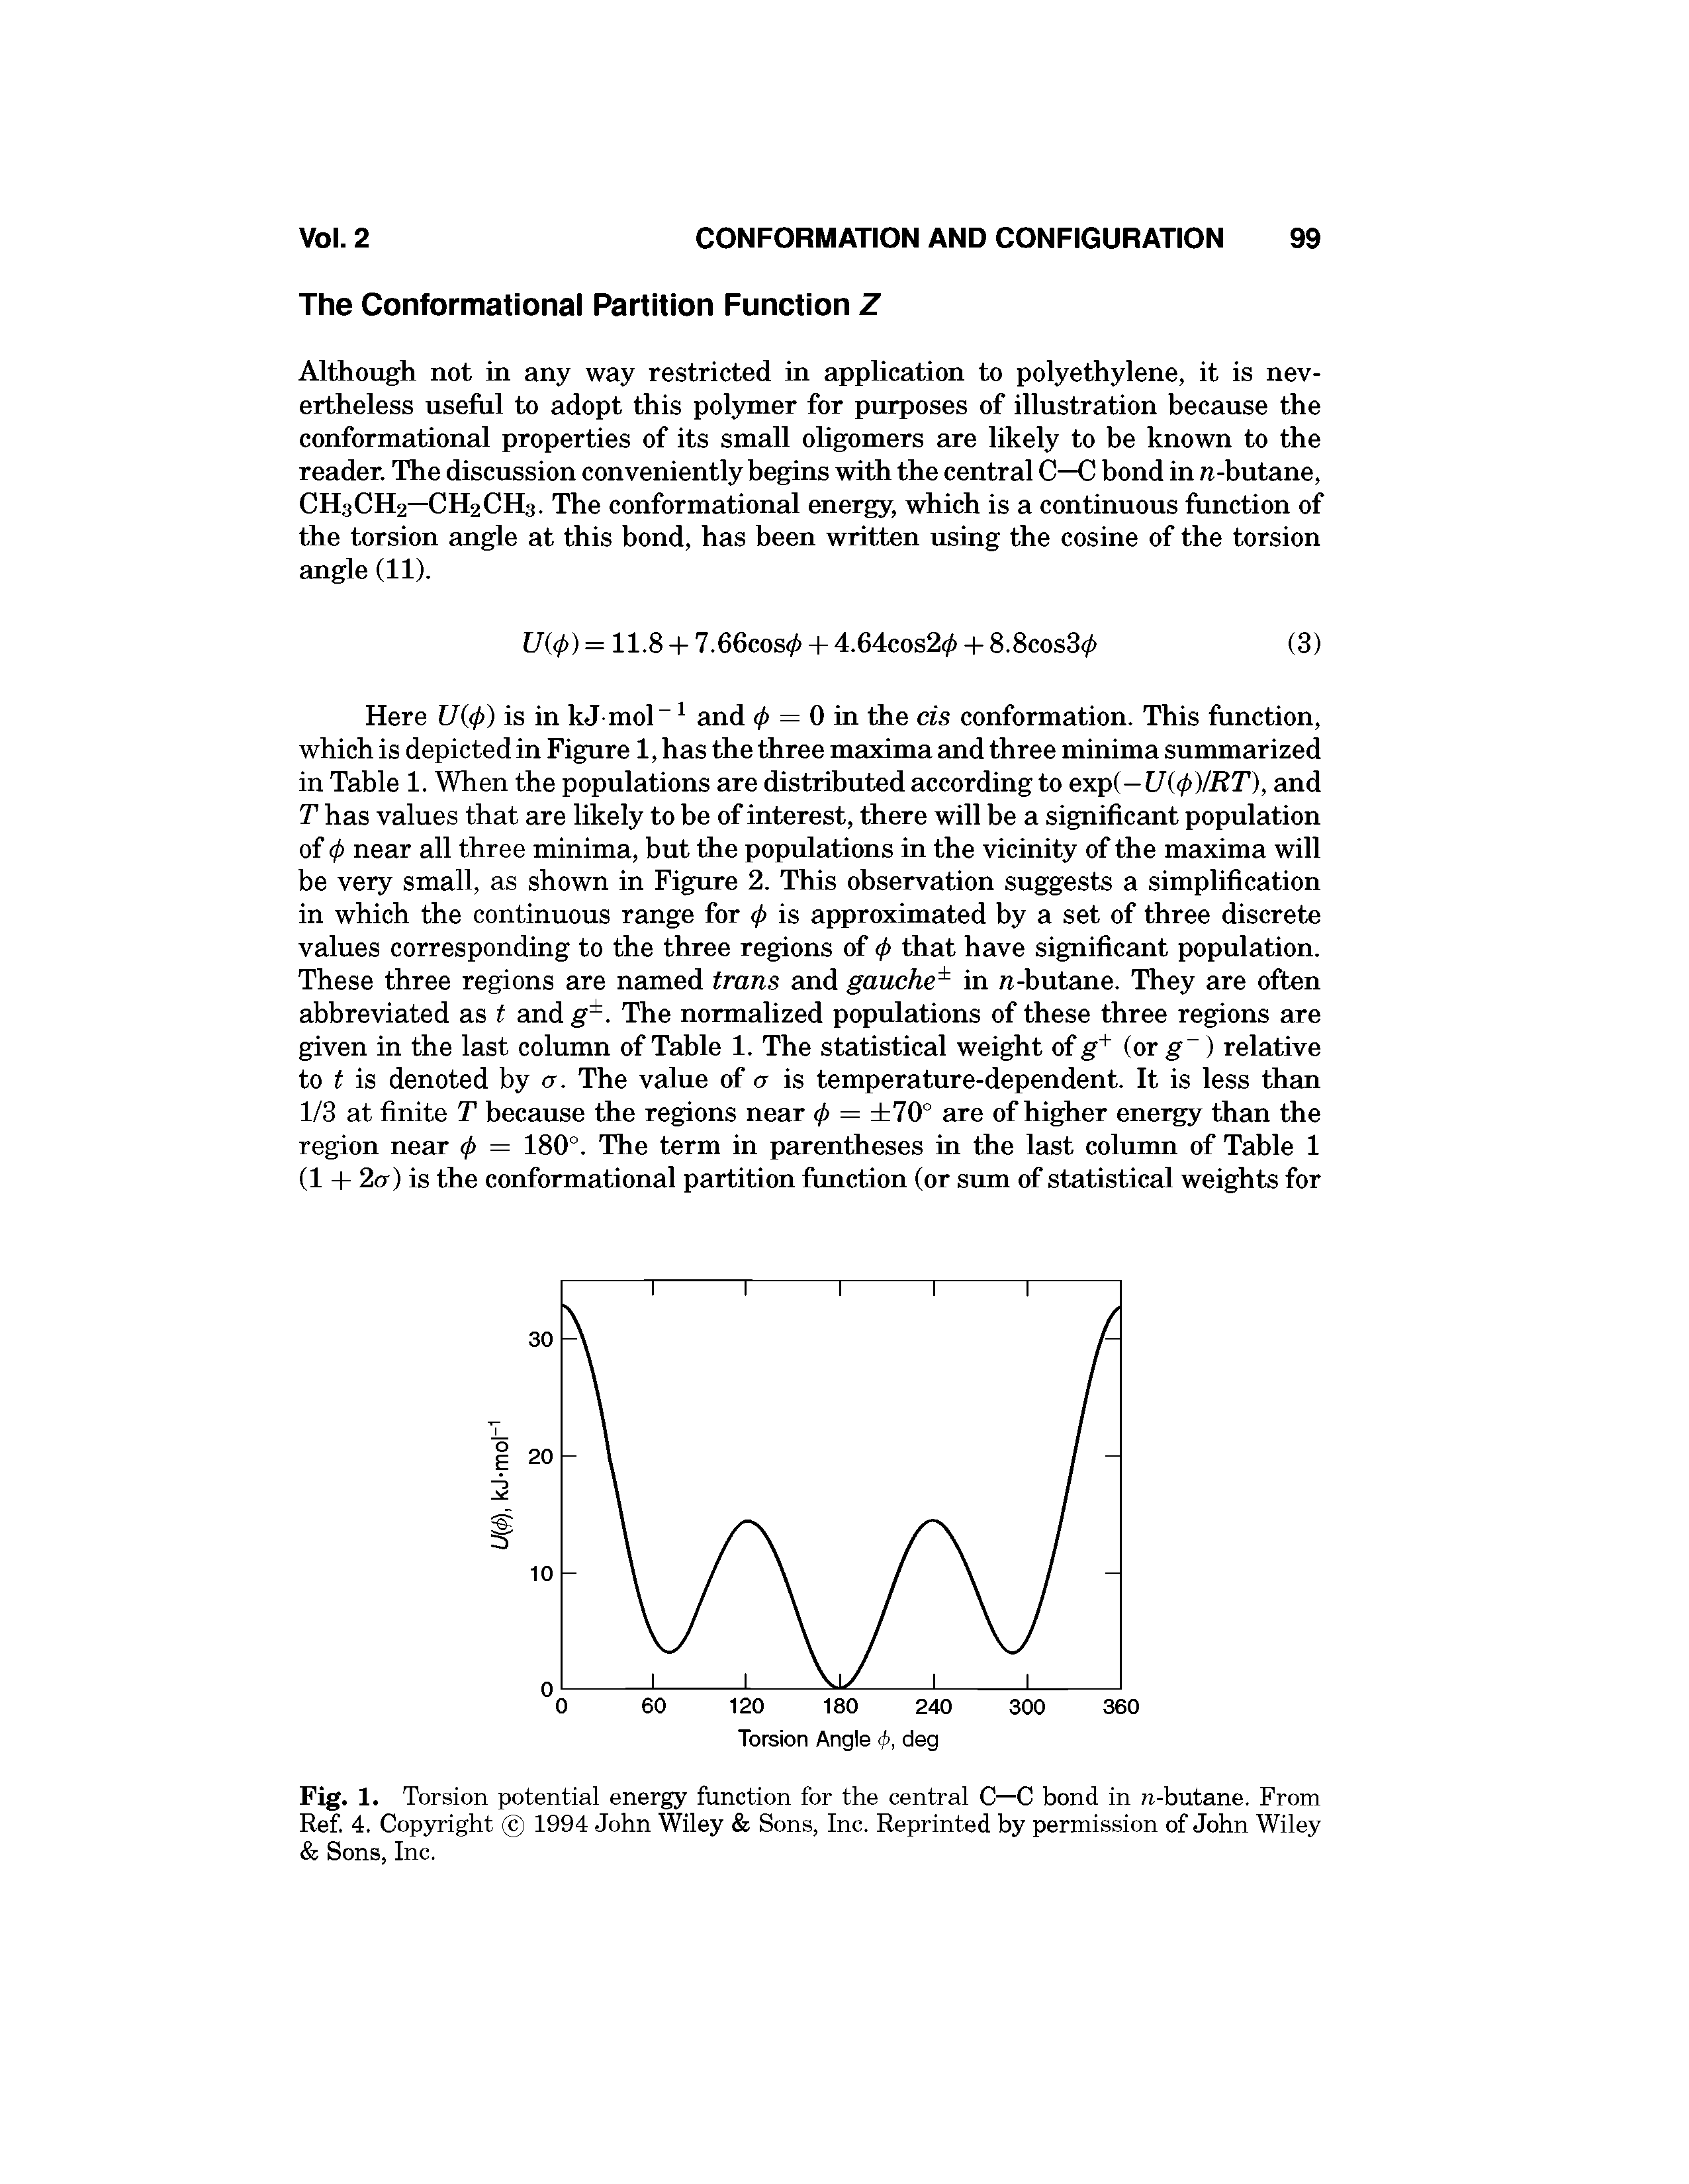 Fig. 1. Torsion potential energy function for the central C—C bond in n-butane. From Ref 4. Copyright 1994 John Wiley Sons, Inc. Reprinted by permission of John Wiley Sons, Inc.